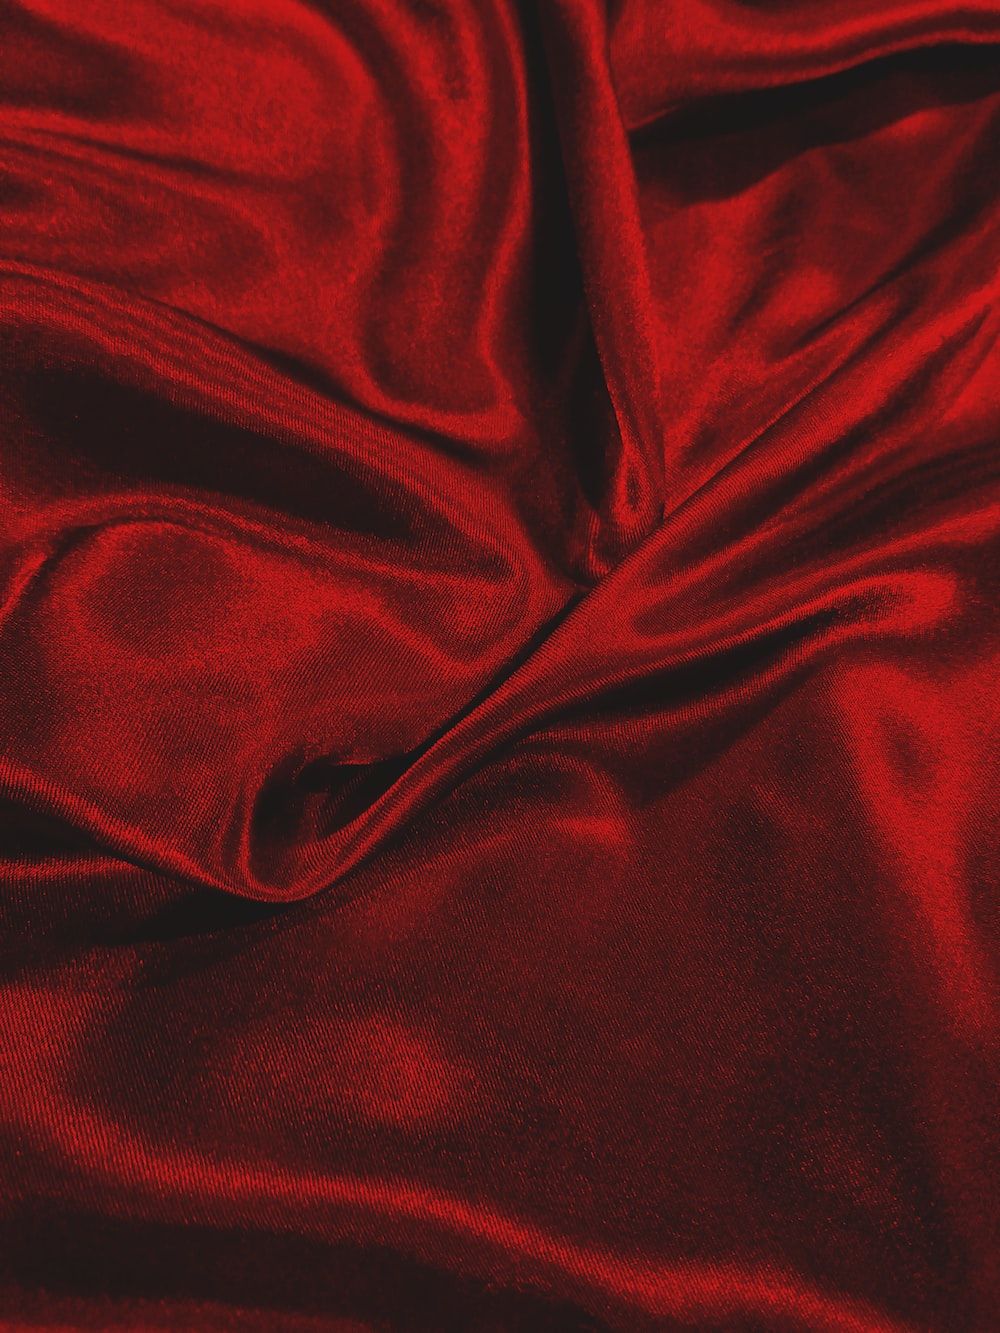 A close up of a red velvet fabric - Light red